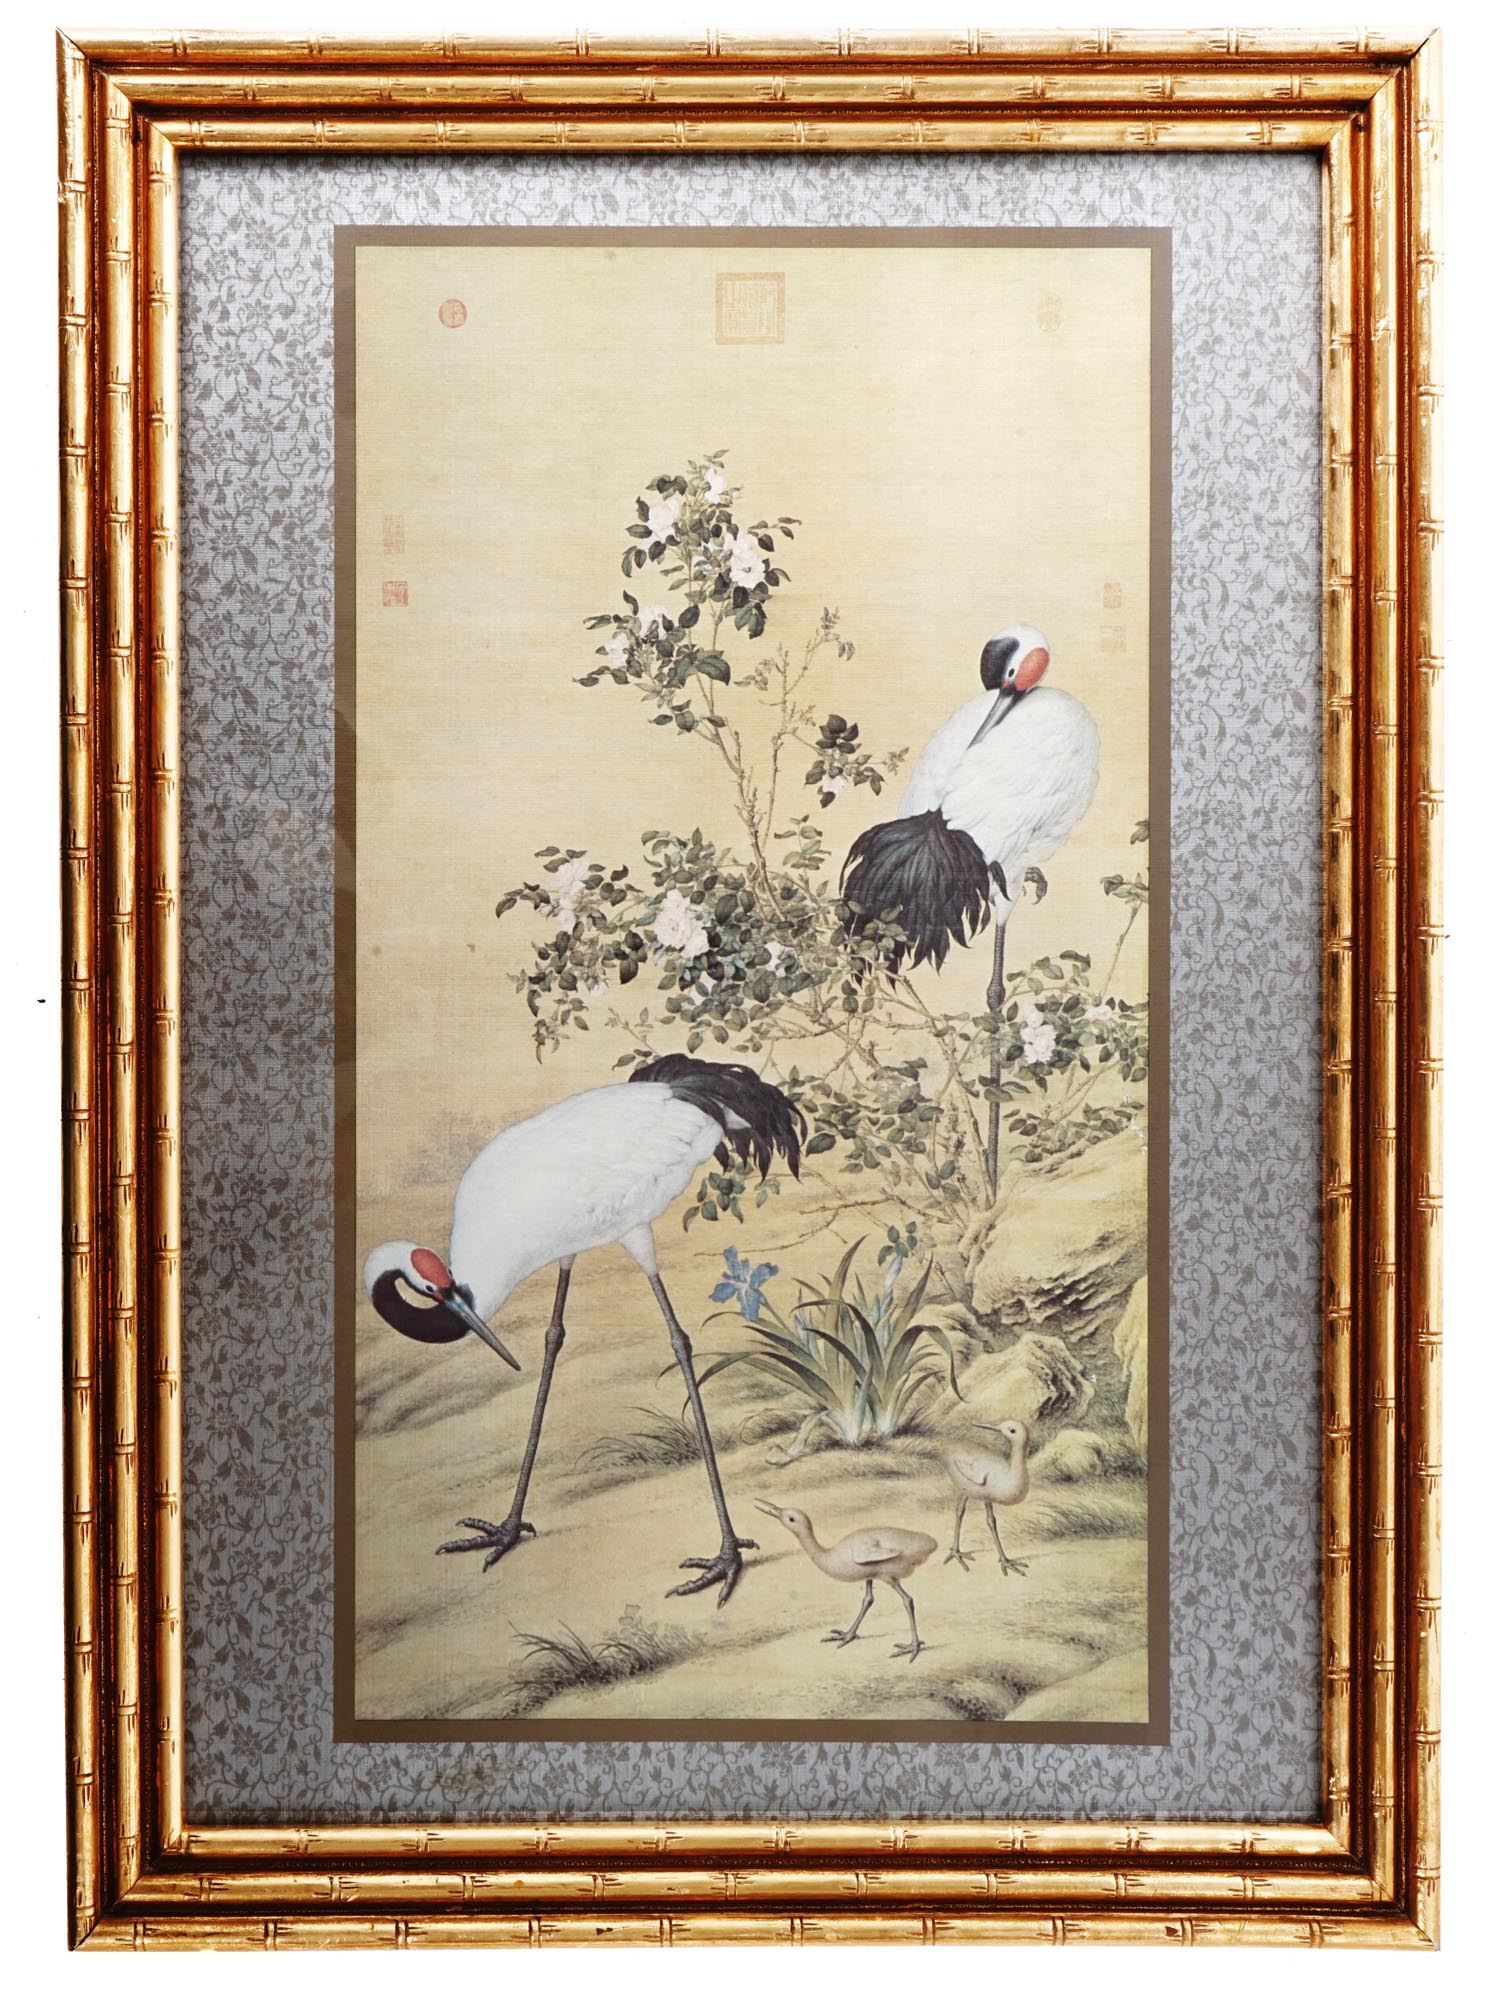 CHINESE CRANES PRINT AFTER GIUSEPPE CASTIGLIONE